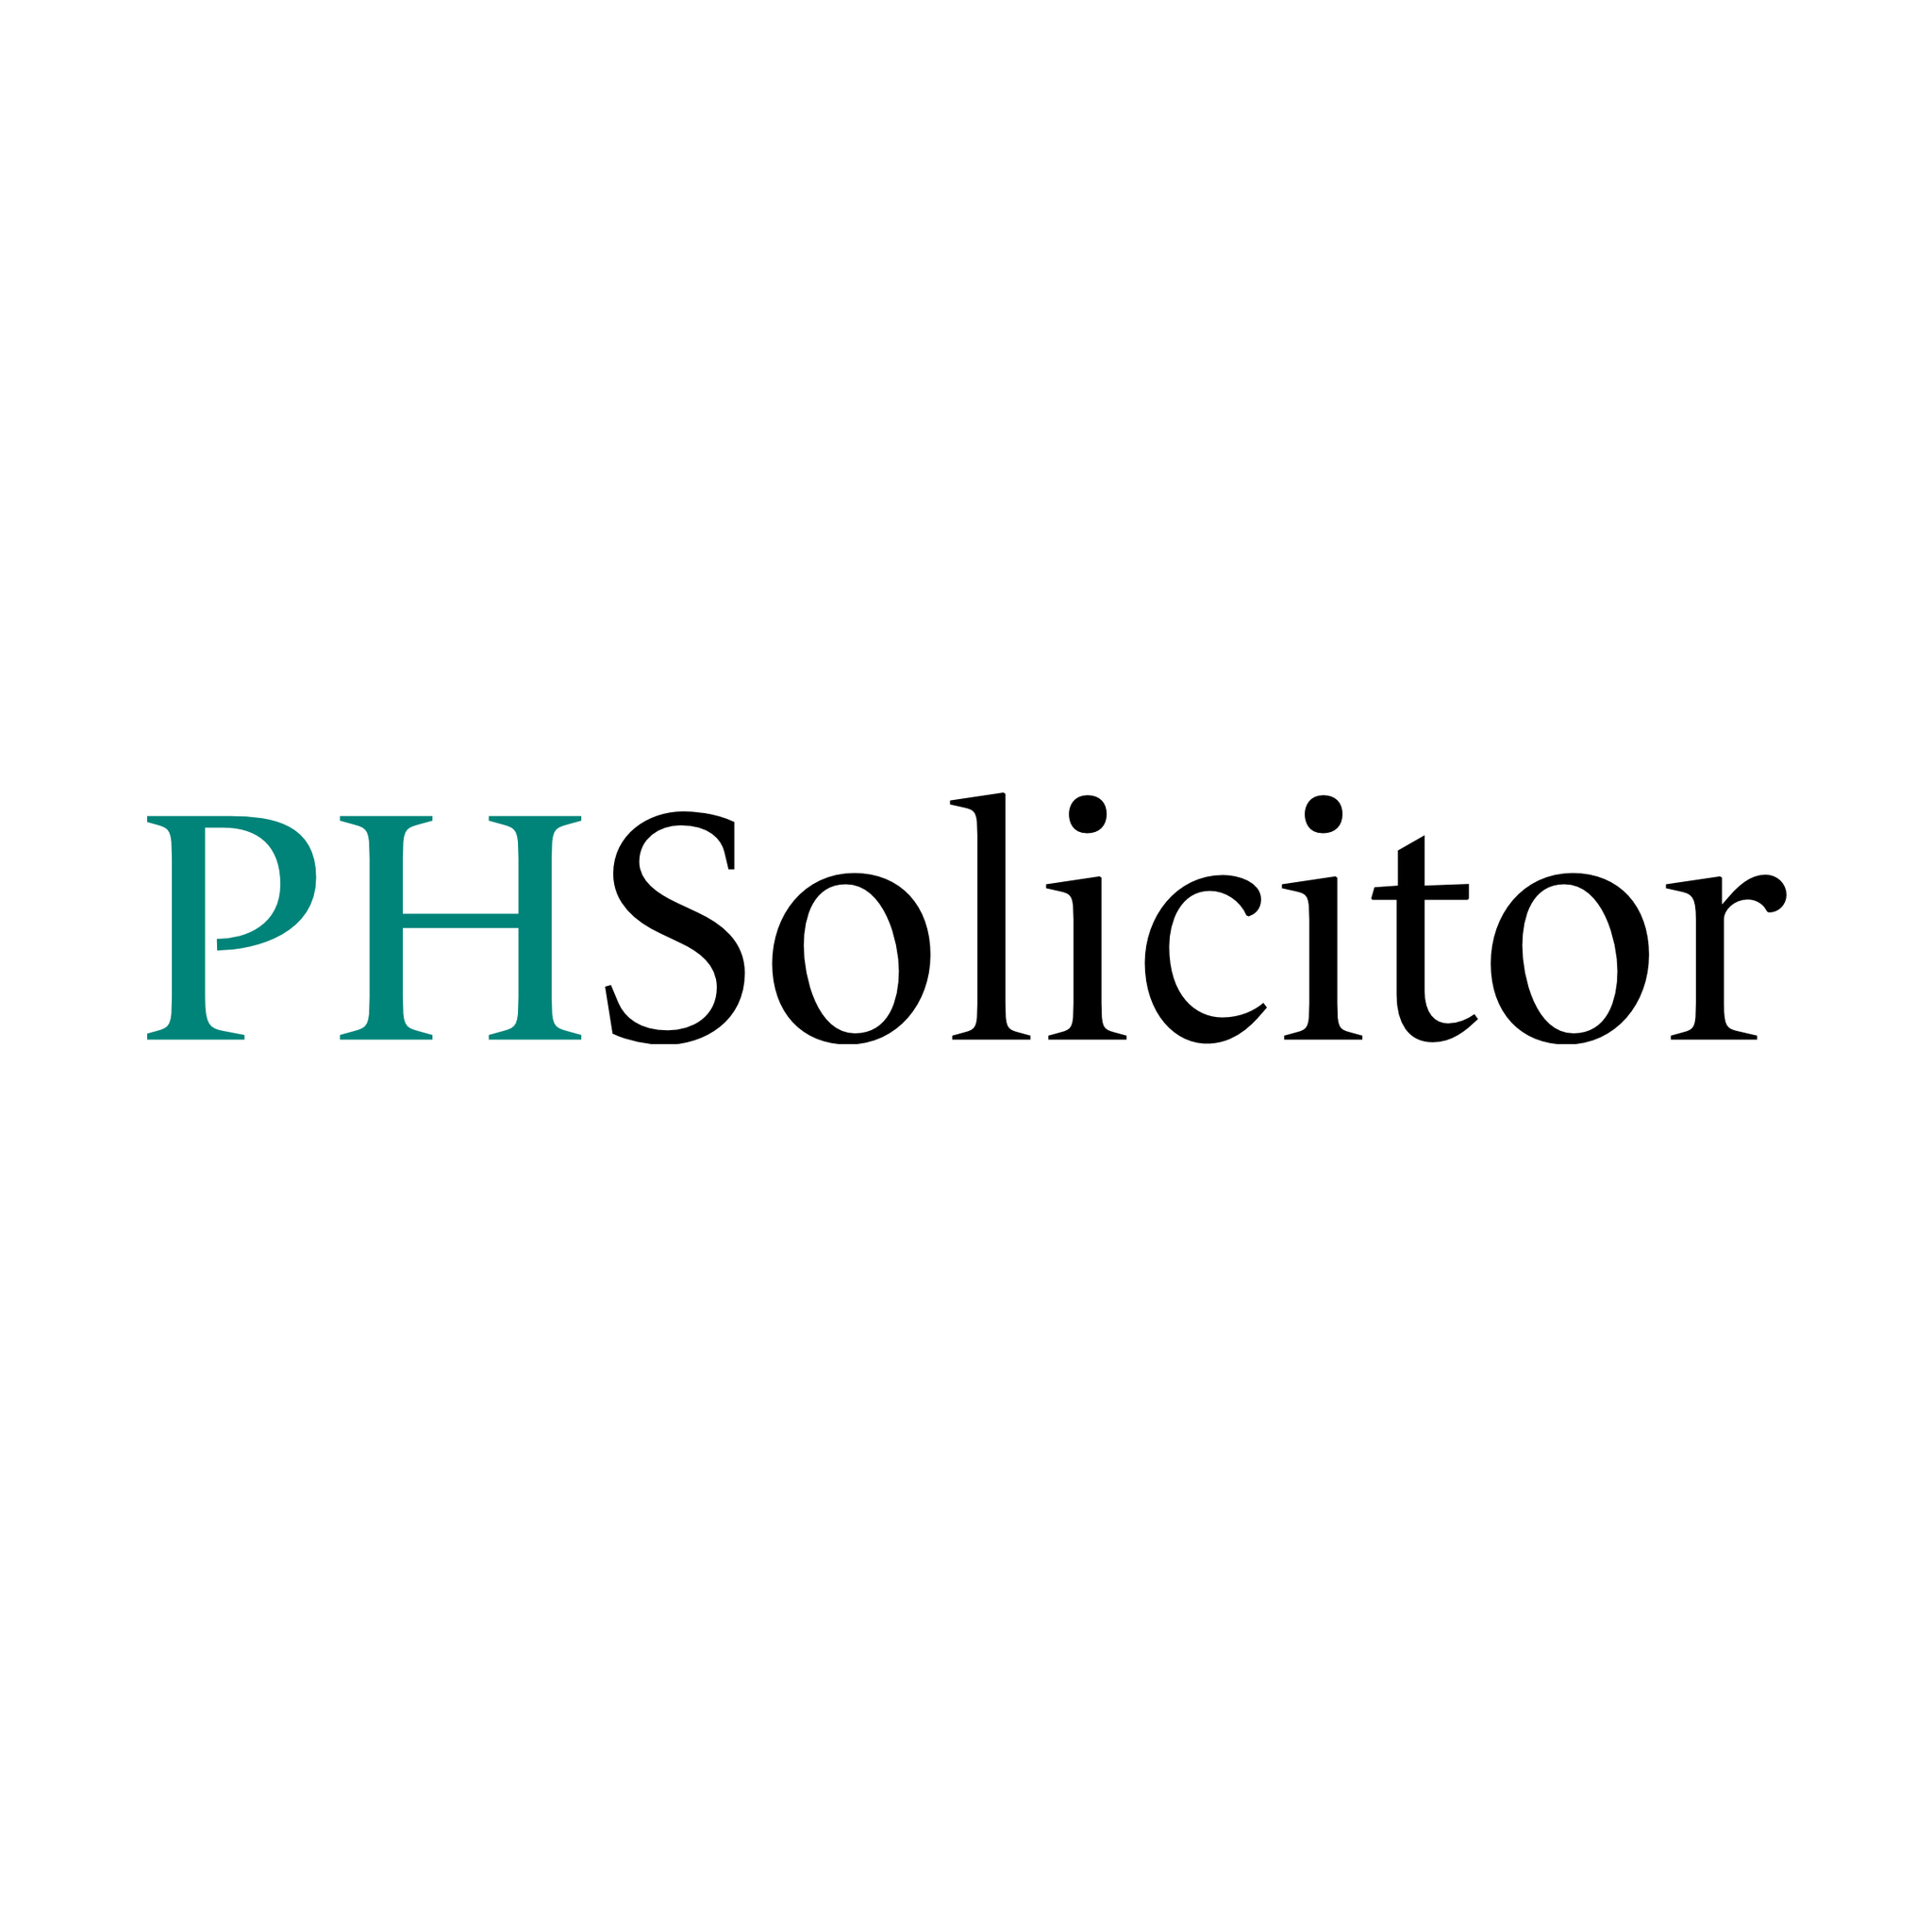 PH Solicitor